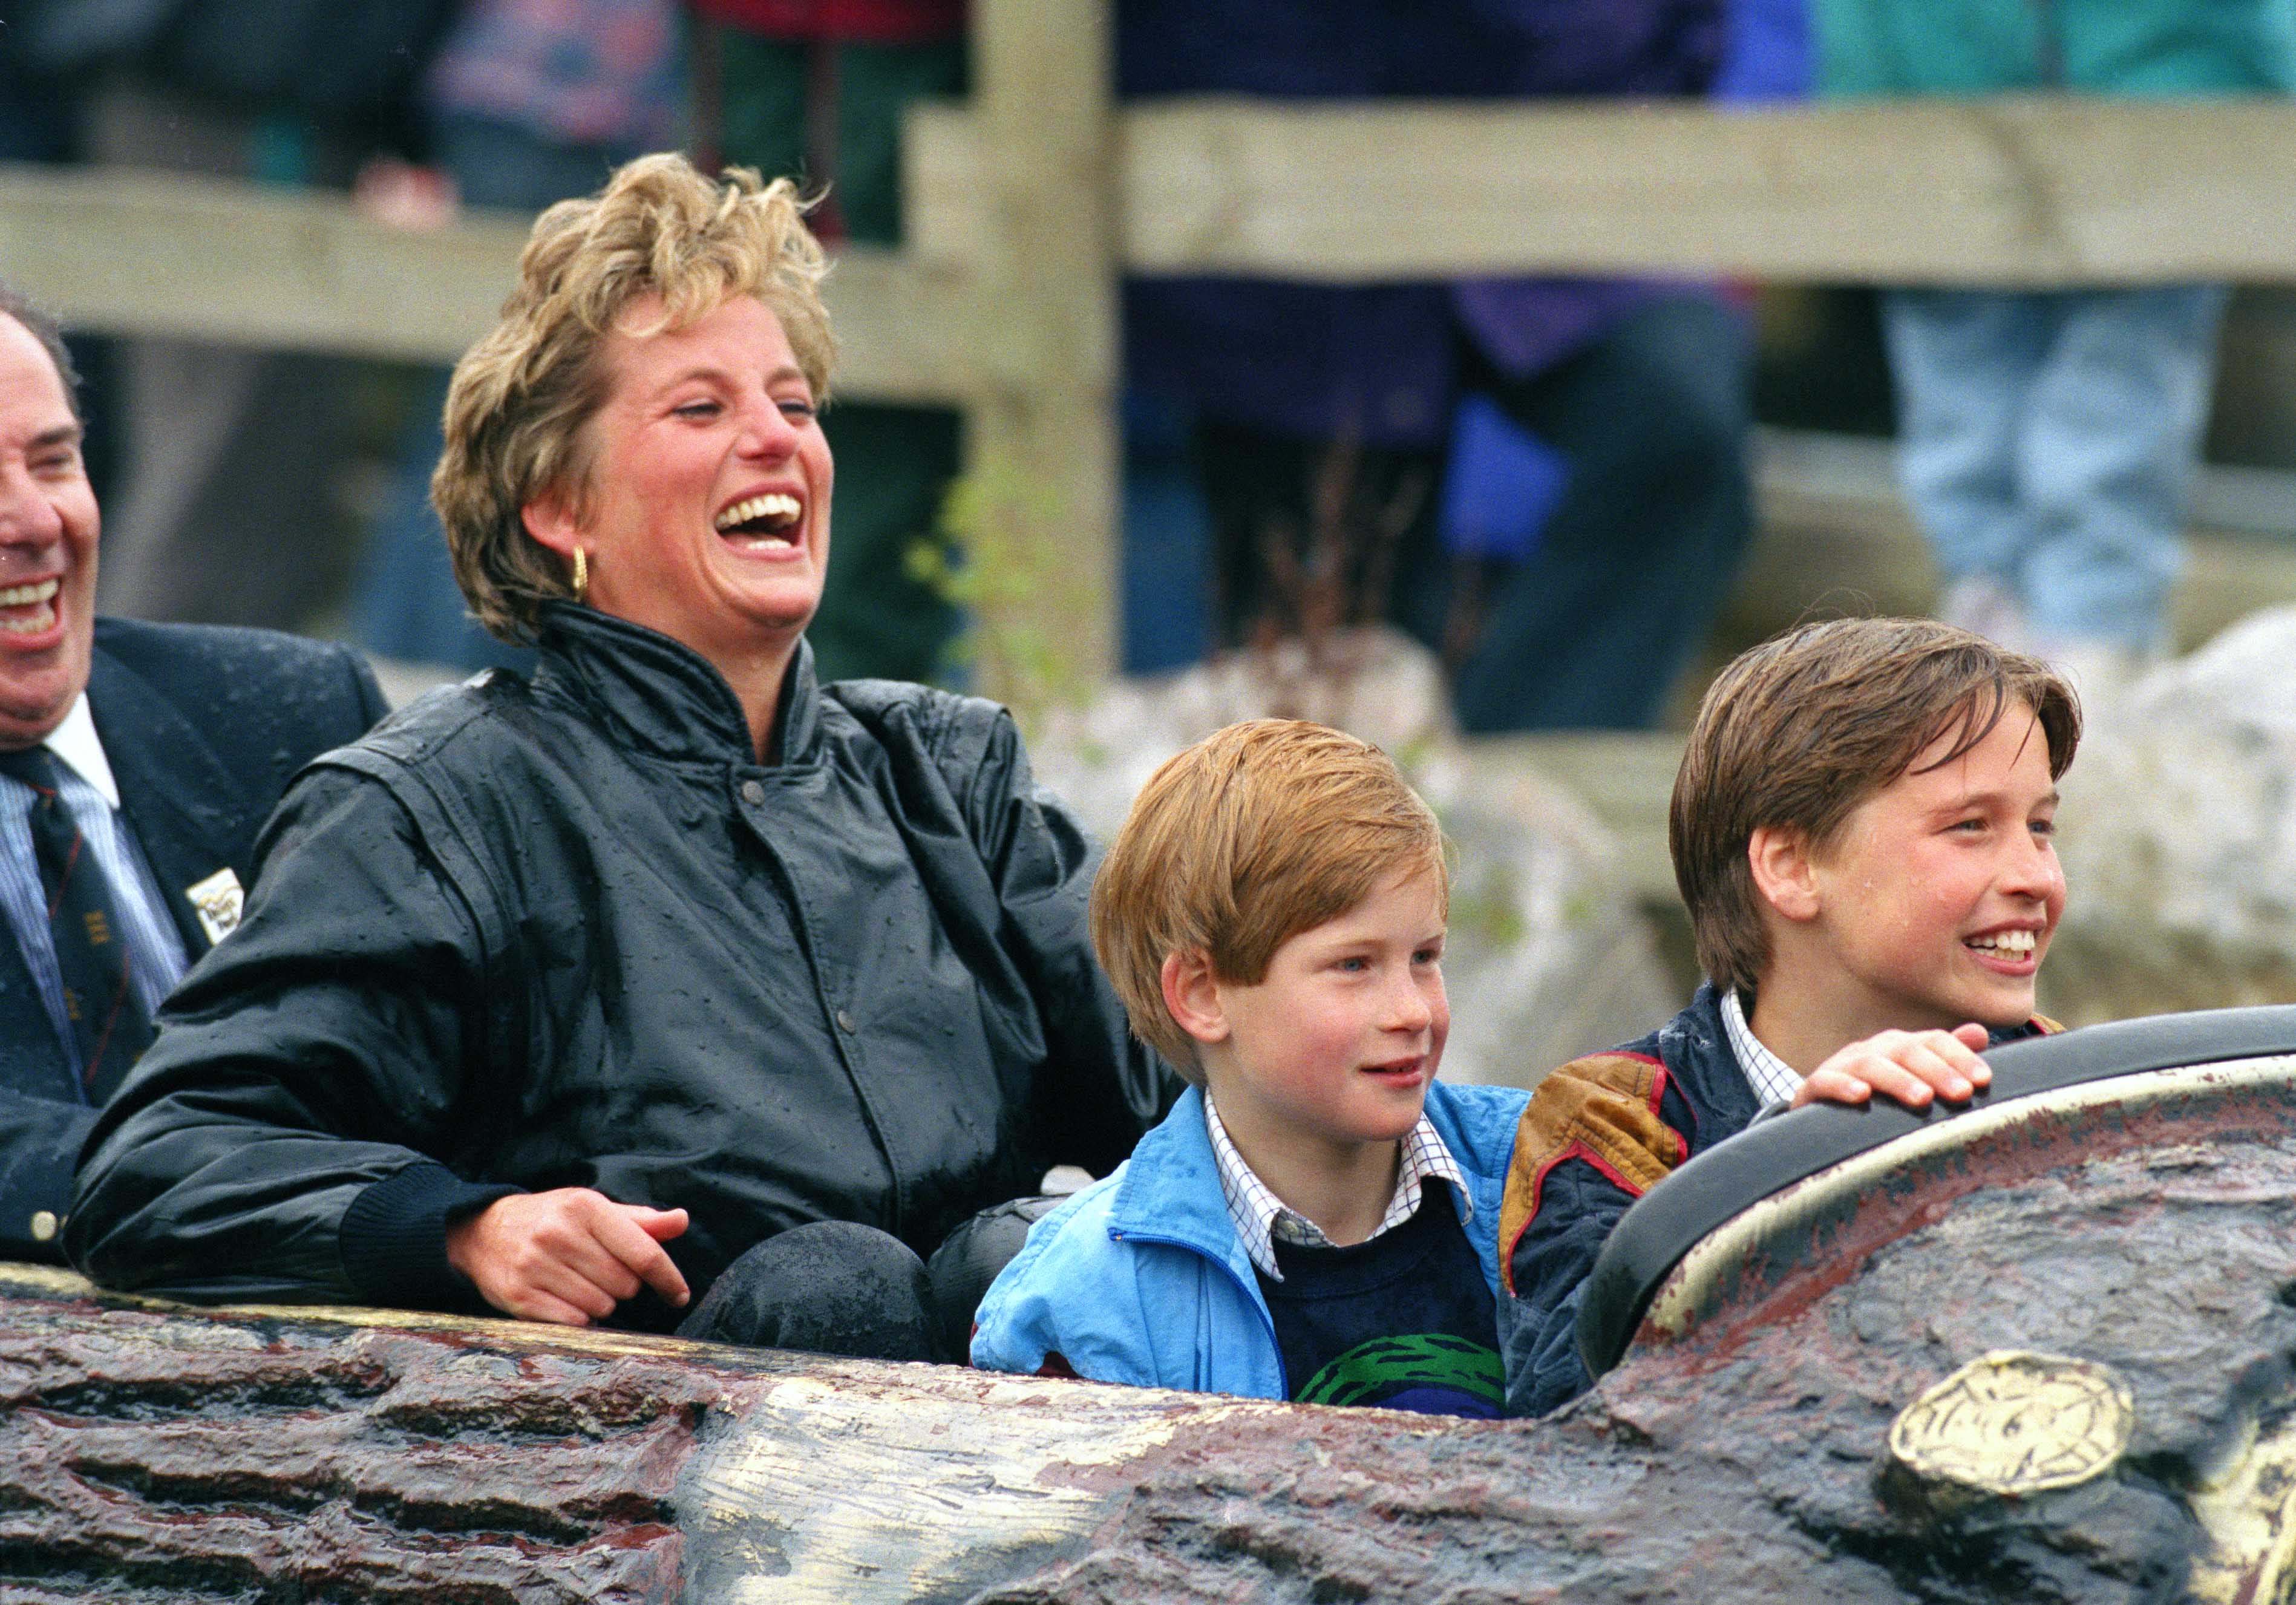 Princess Diana, Prince William and Prince Harry at an amusement park in England in 1993. |  Source: Getty Images